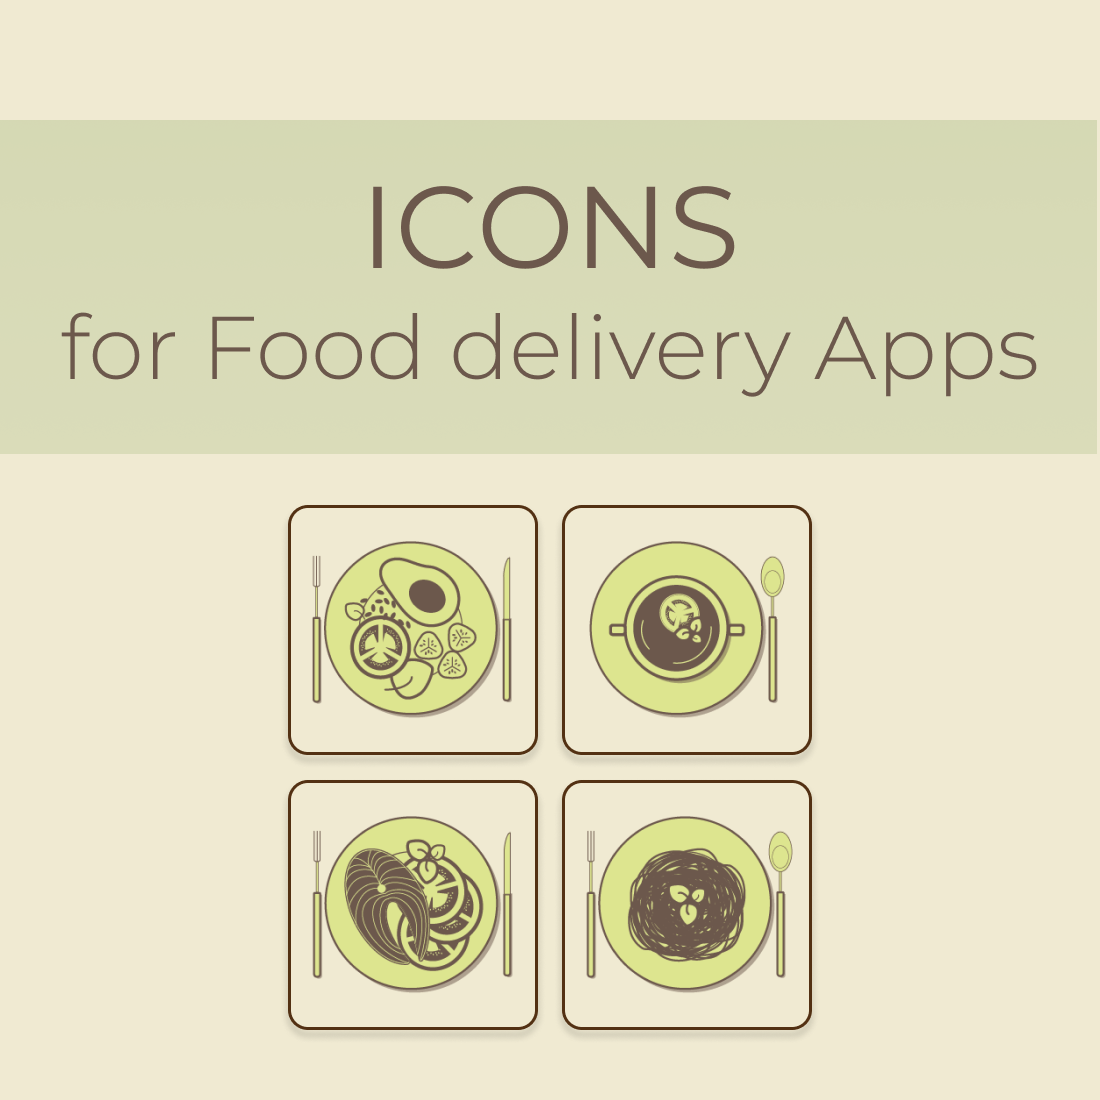 10 Food Icons For Your Apps Cover Image.